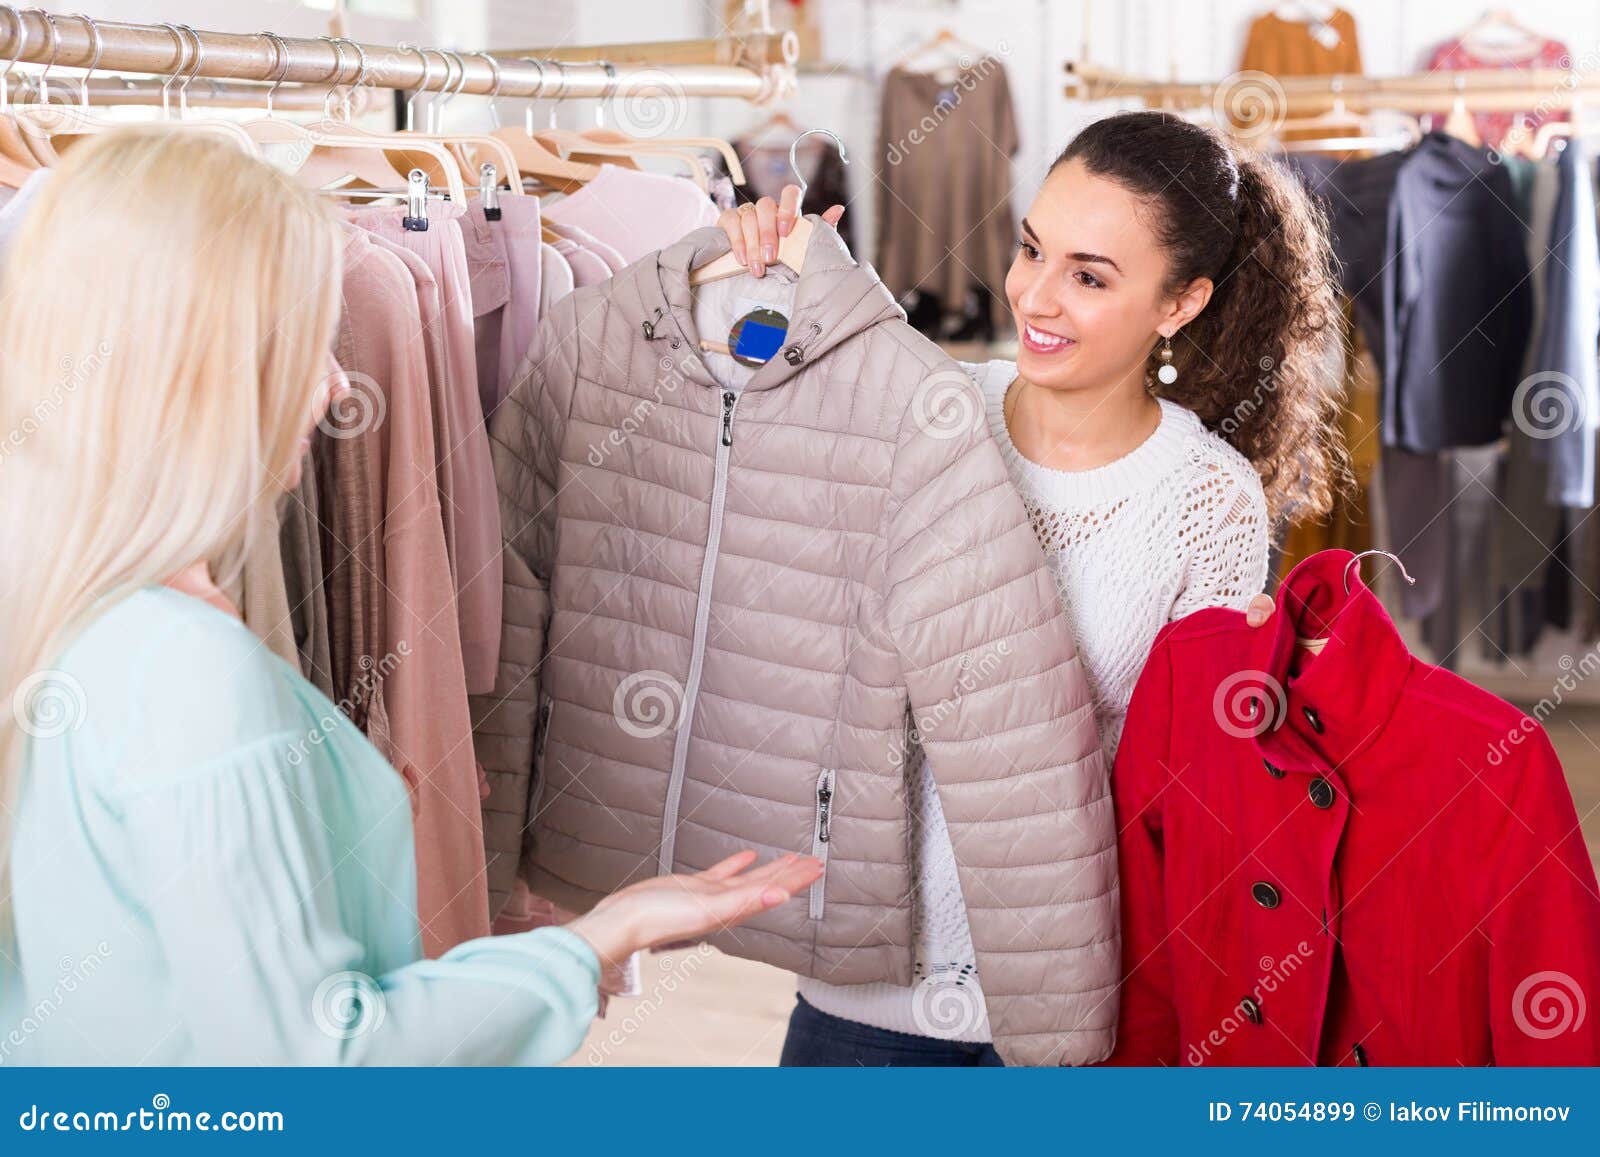 Smiling Young Women Shopping Stock Image - Image of people, person ...